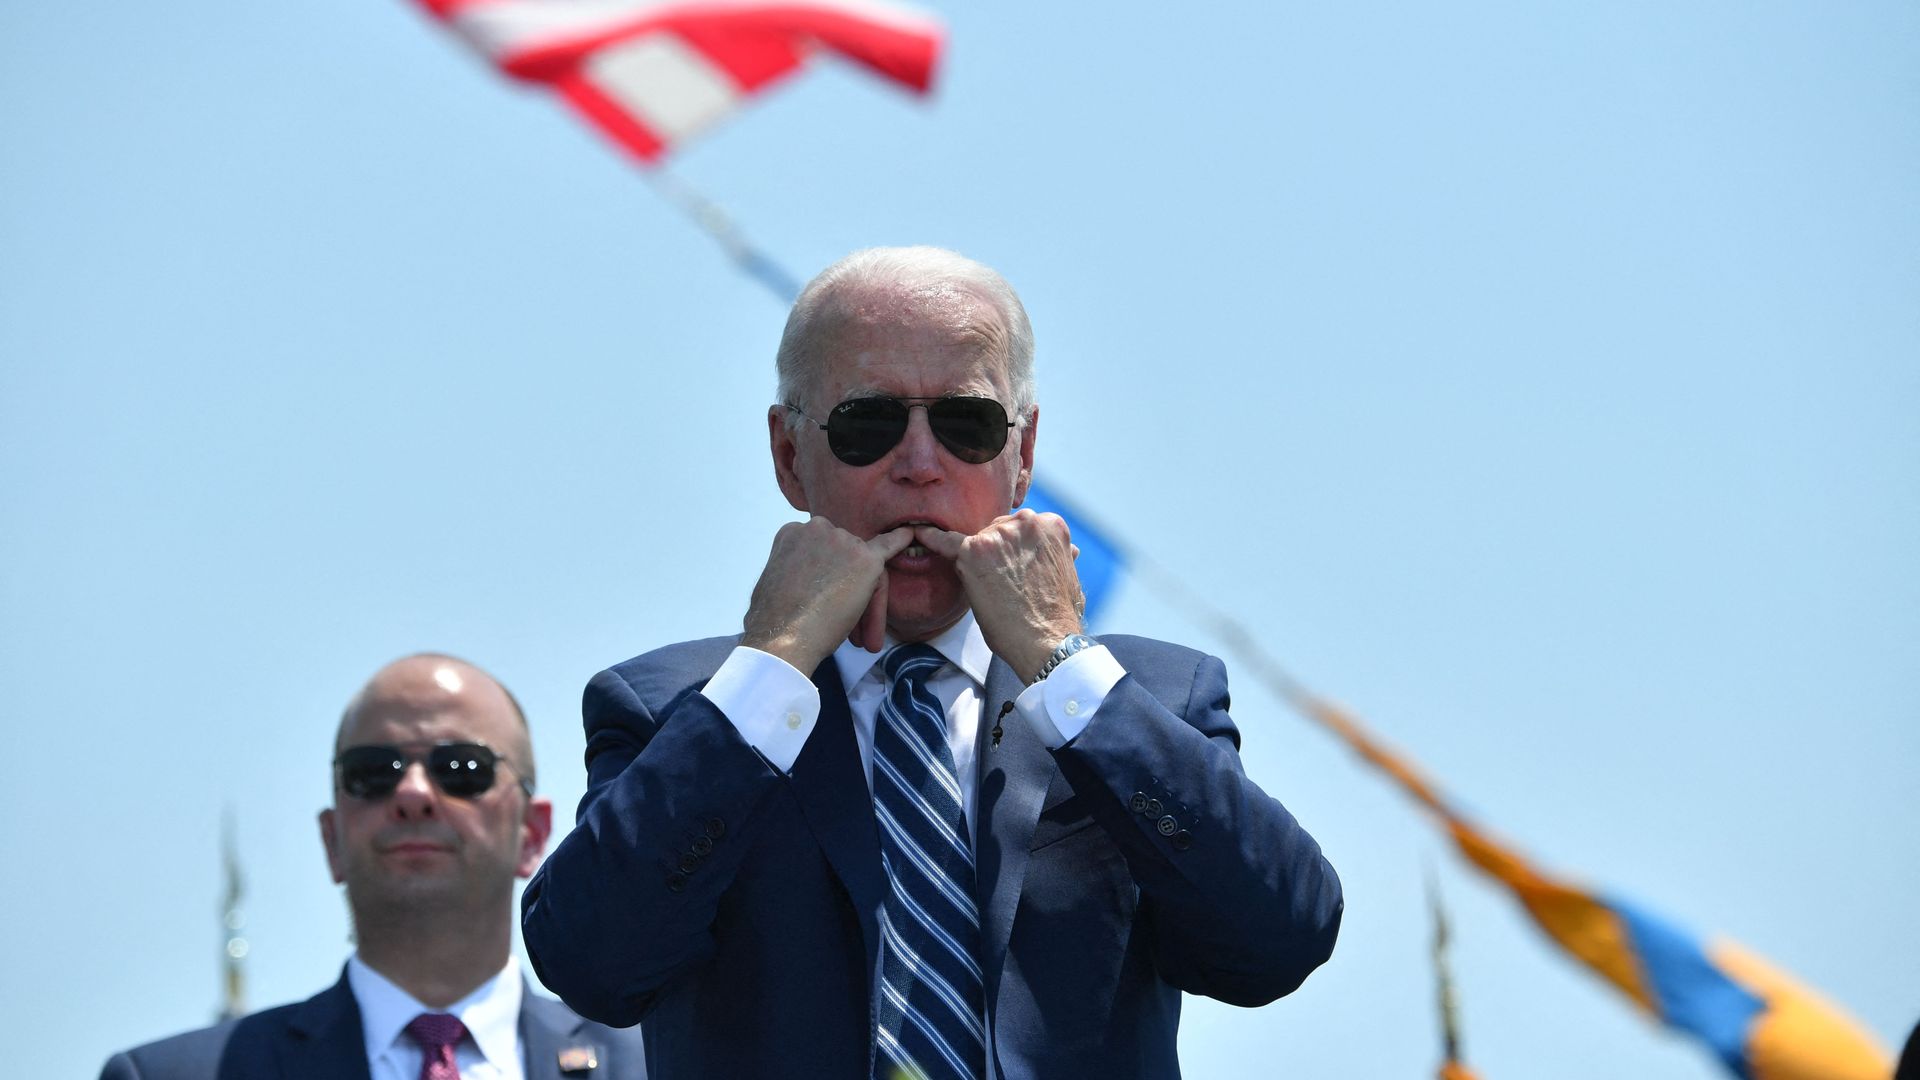 President Biden is seen with fingers in his mouth as he whistles during the Coast Guard Academy graduation ceremony.